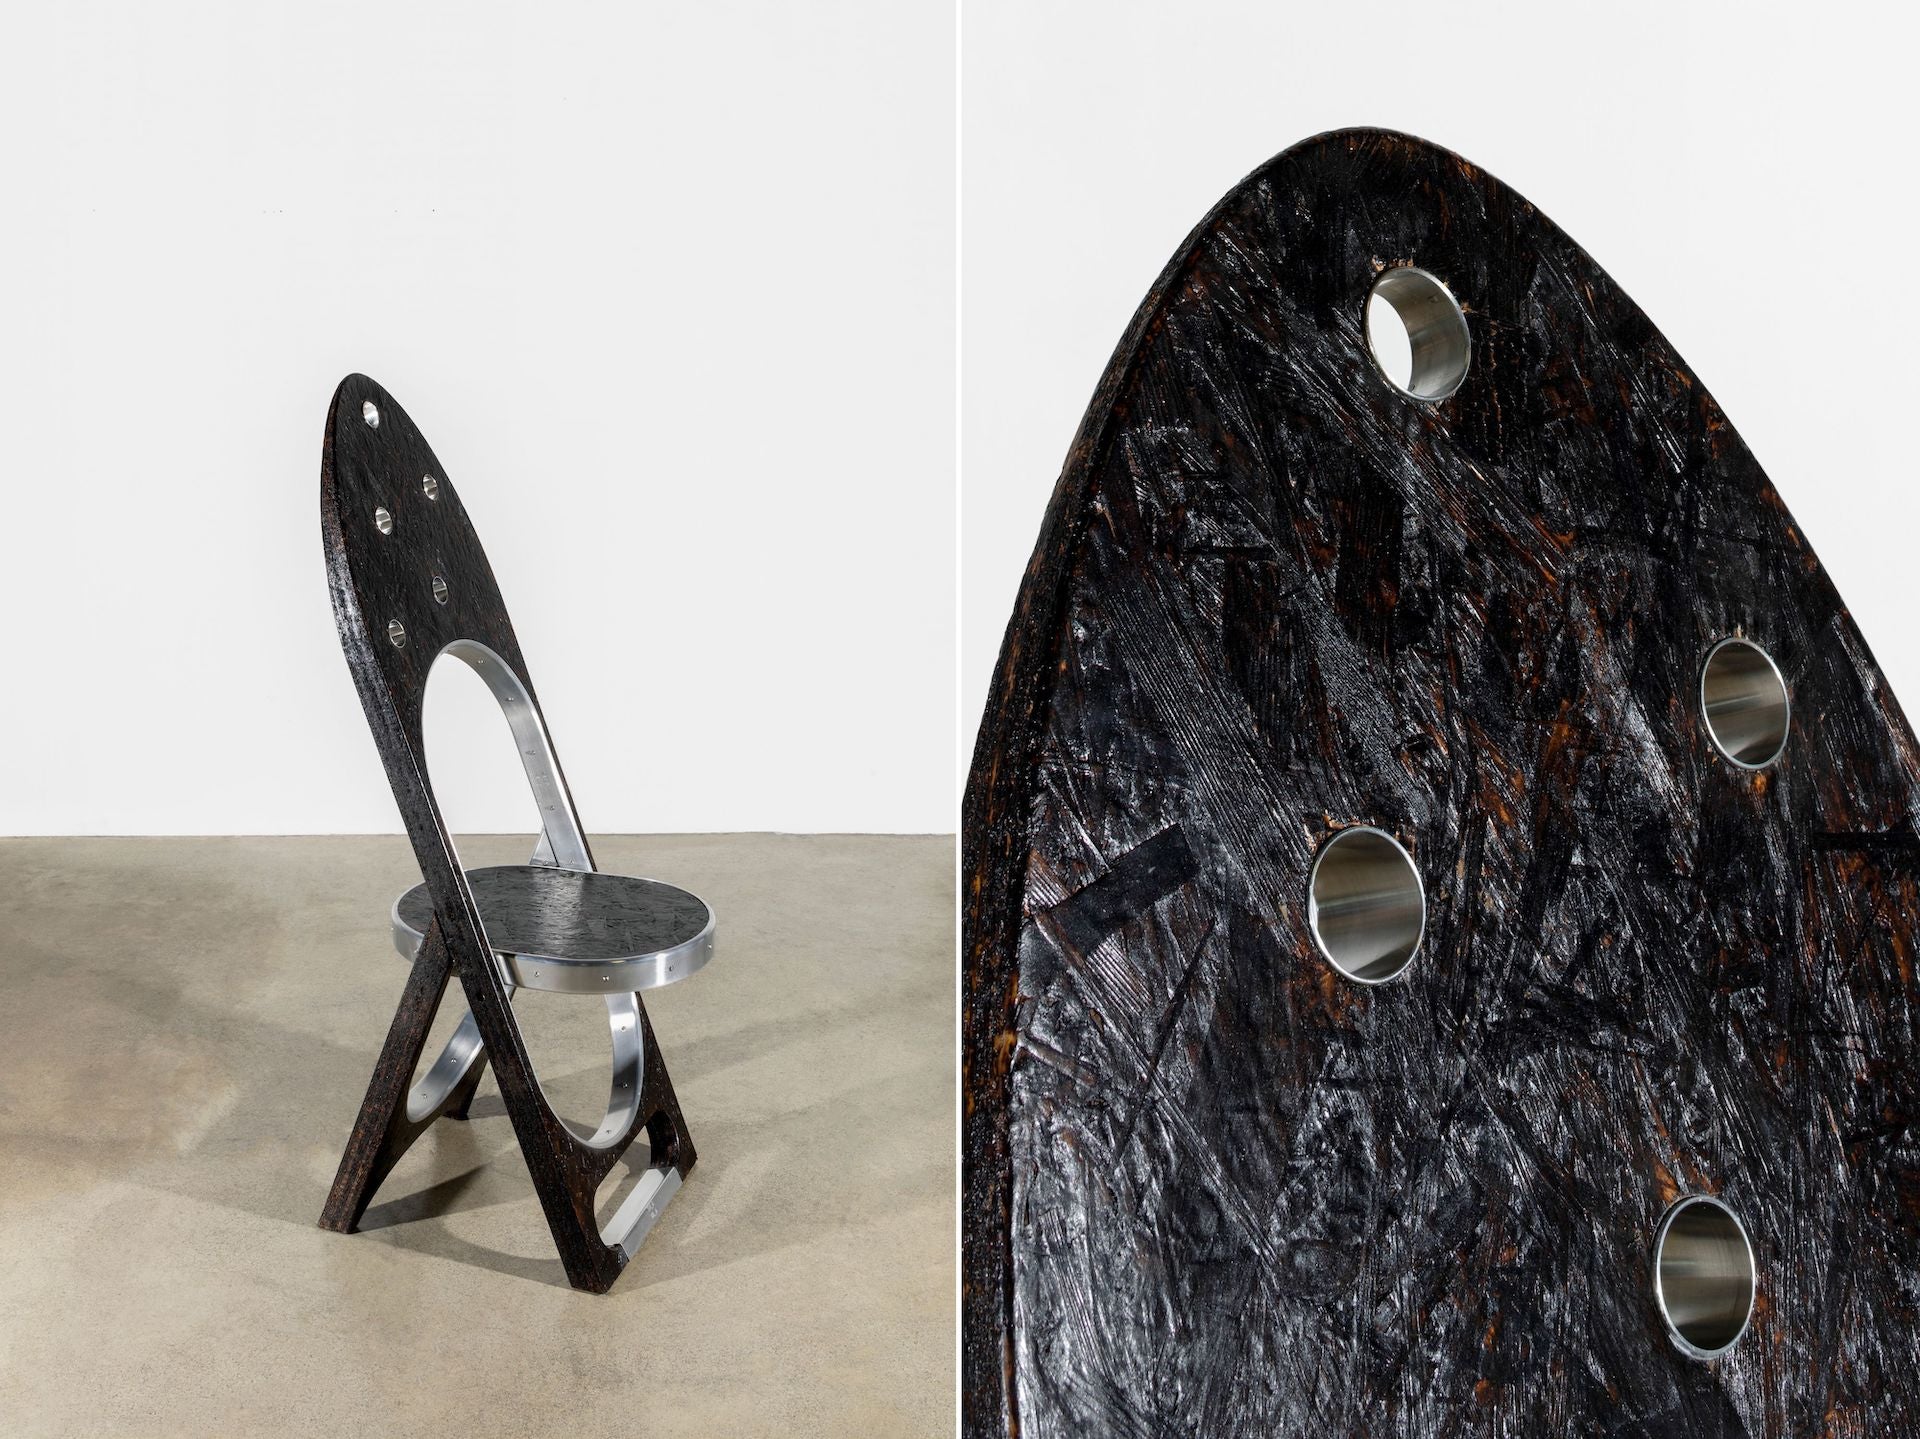 Represented by Friedman Benda: Trauma Chair by Samuel Ross, 2020, composed of burnished steel and molasses lacquer. Acquired by the Museum of Fine Arts Houston. Photo © Daniel Kukla; courtesy of Friedman Benda and the artist